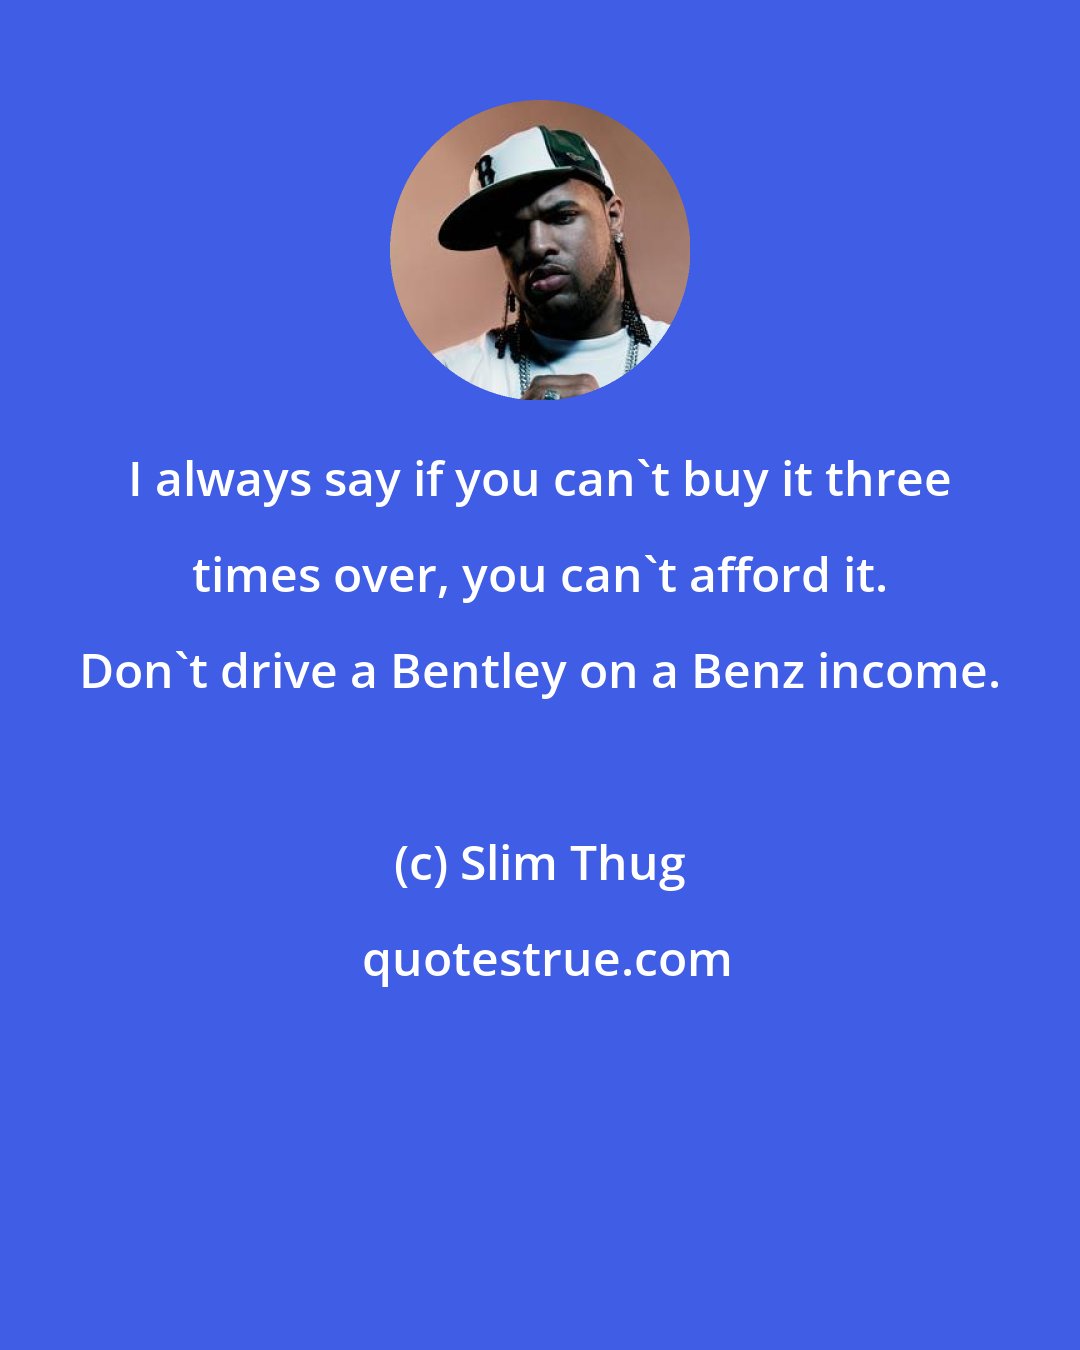 Slim Thug: I always say if you can't buy it three times over, you can't afford it. Don't drive a Bentley on a Benz income.